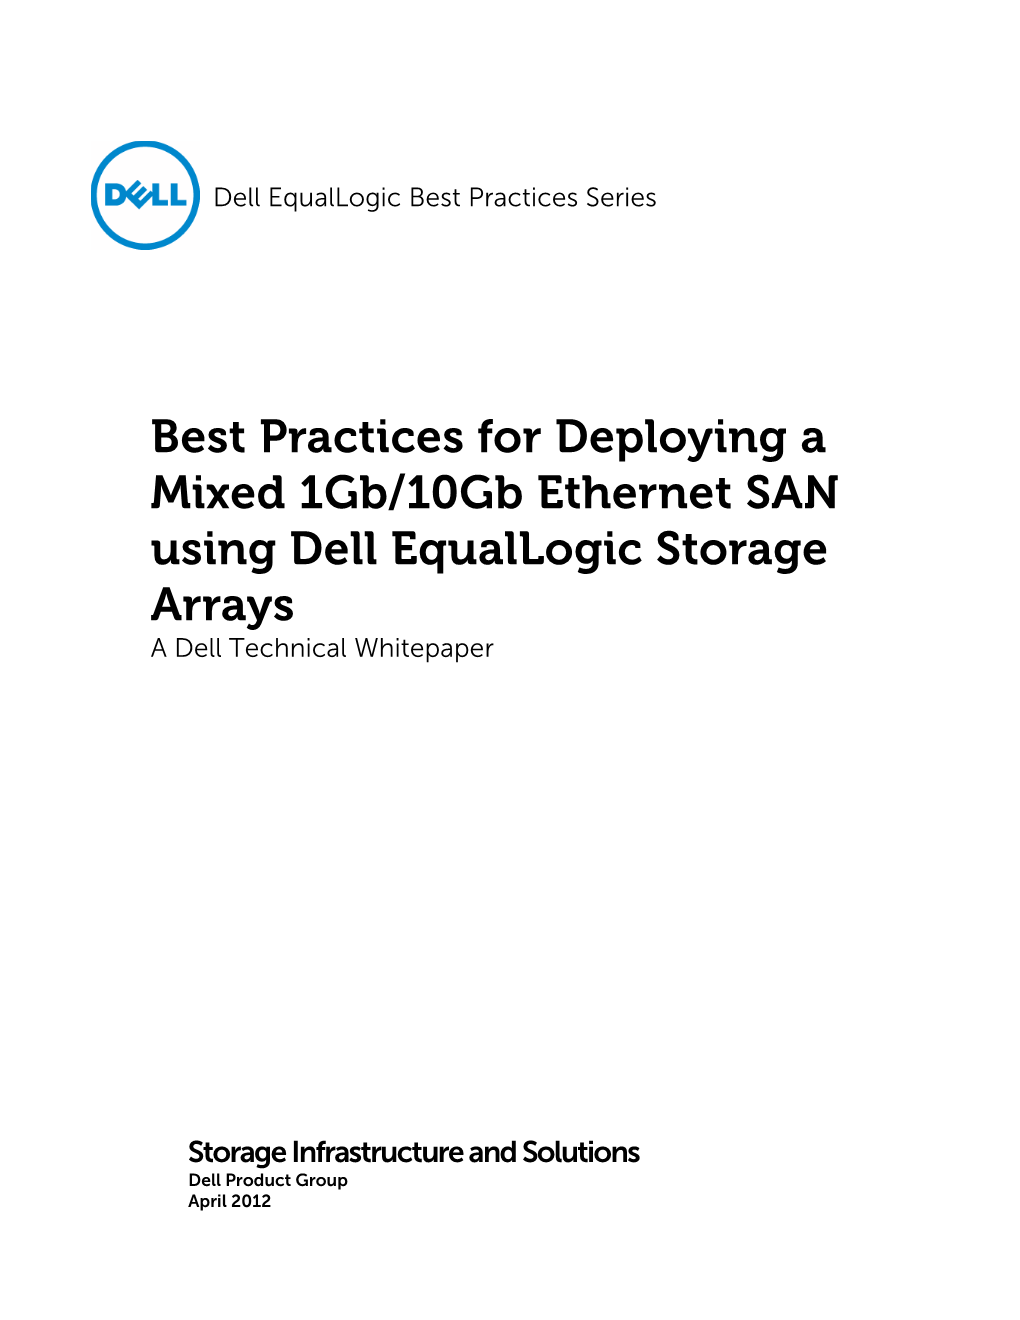 Best Practices for Deploying a Mixed 1Gb/10Gb Ethernet SAN Using Dell Equallogic Storage Arrays a Dell Technical Whitepaper